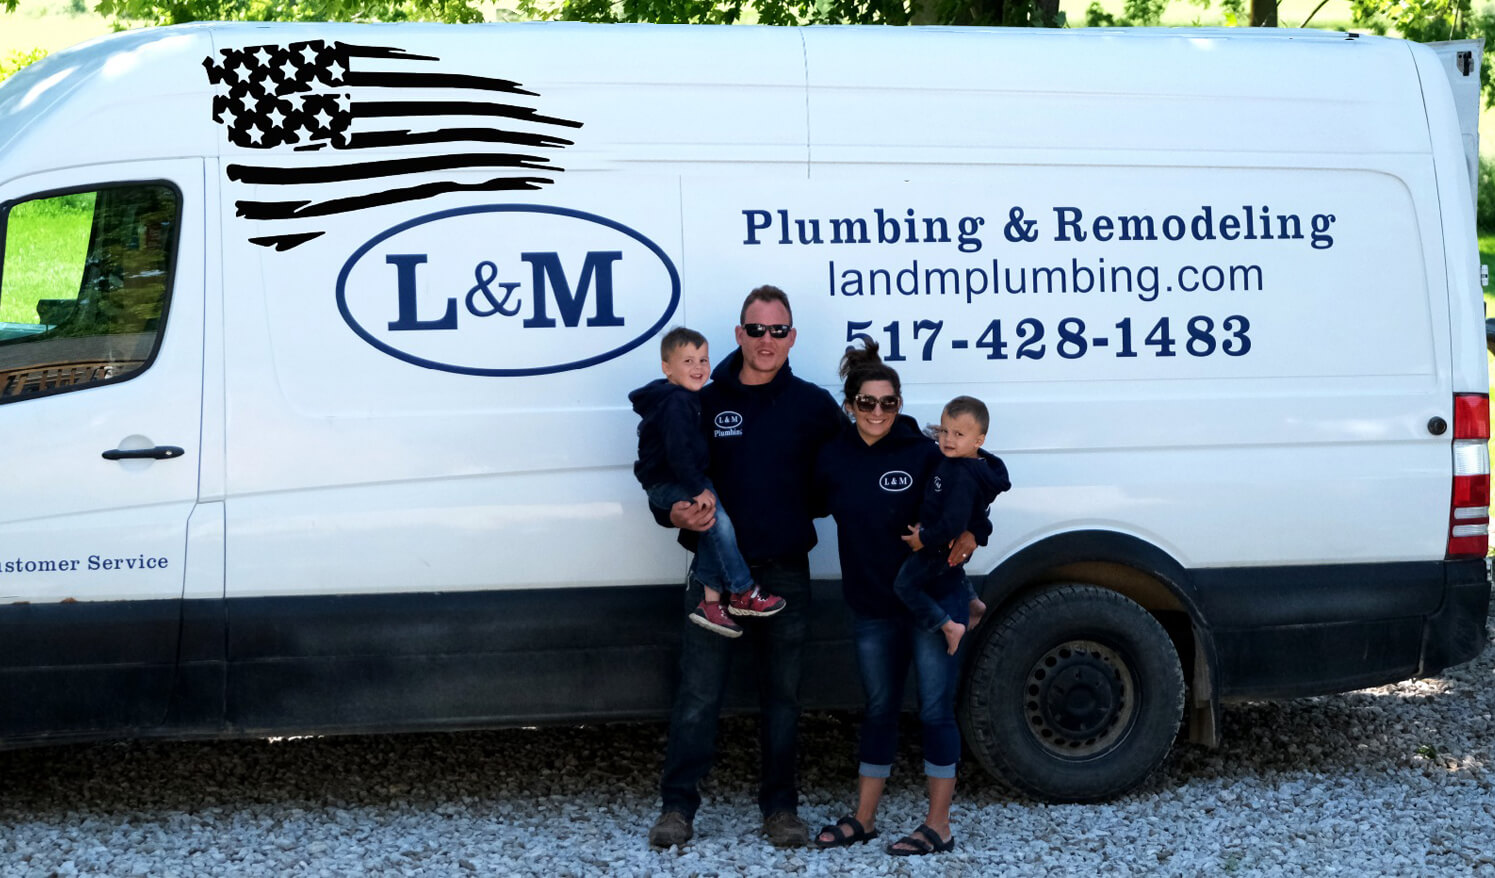 Get your Plumbing replacement done by L & M Plumbing LLC in Fowlerville MI.